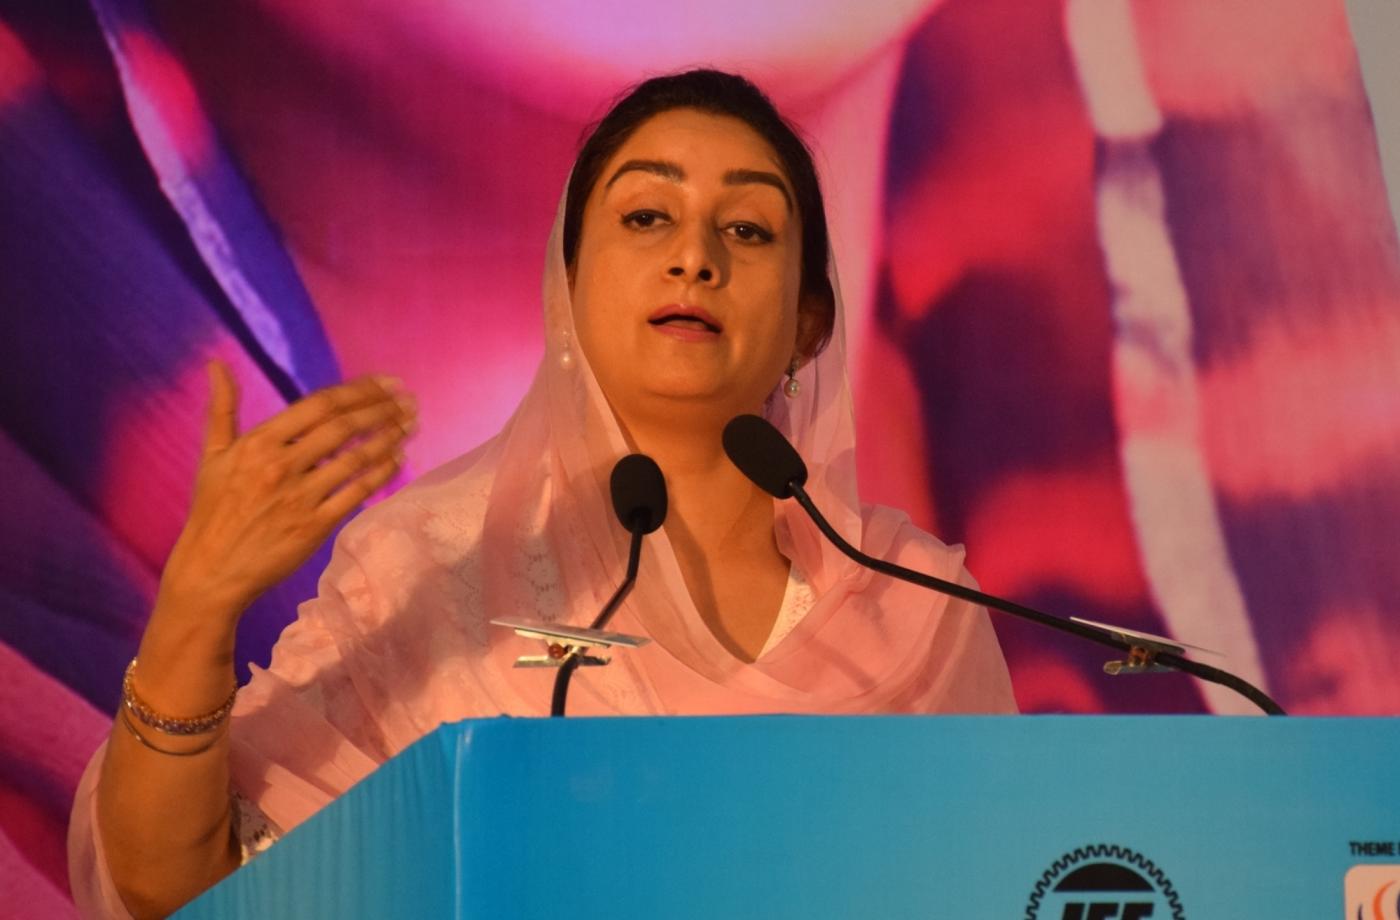 Union Food Processing Industries Minister Harsimrat Kaur Badal addresses at an interactive session, organised by the Indian Chamber of Commerce (ICC), in Kolkata on July 13, 2018. (Photo: IANS/PIB) by .